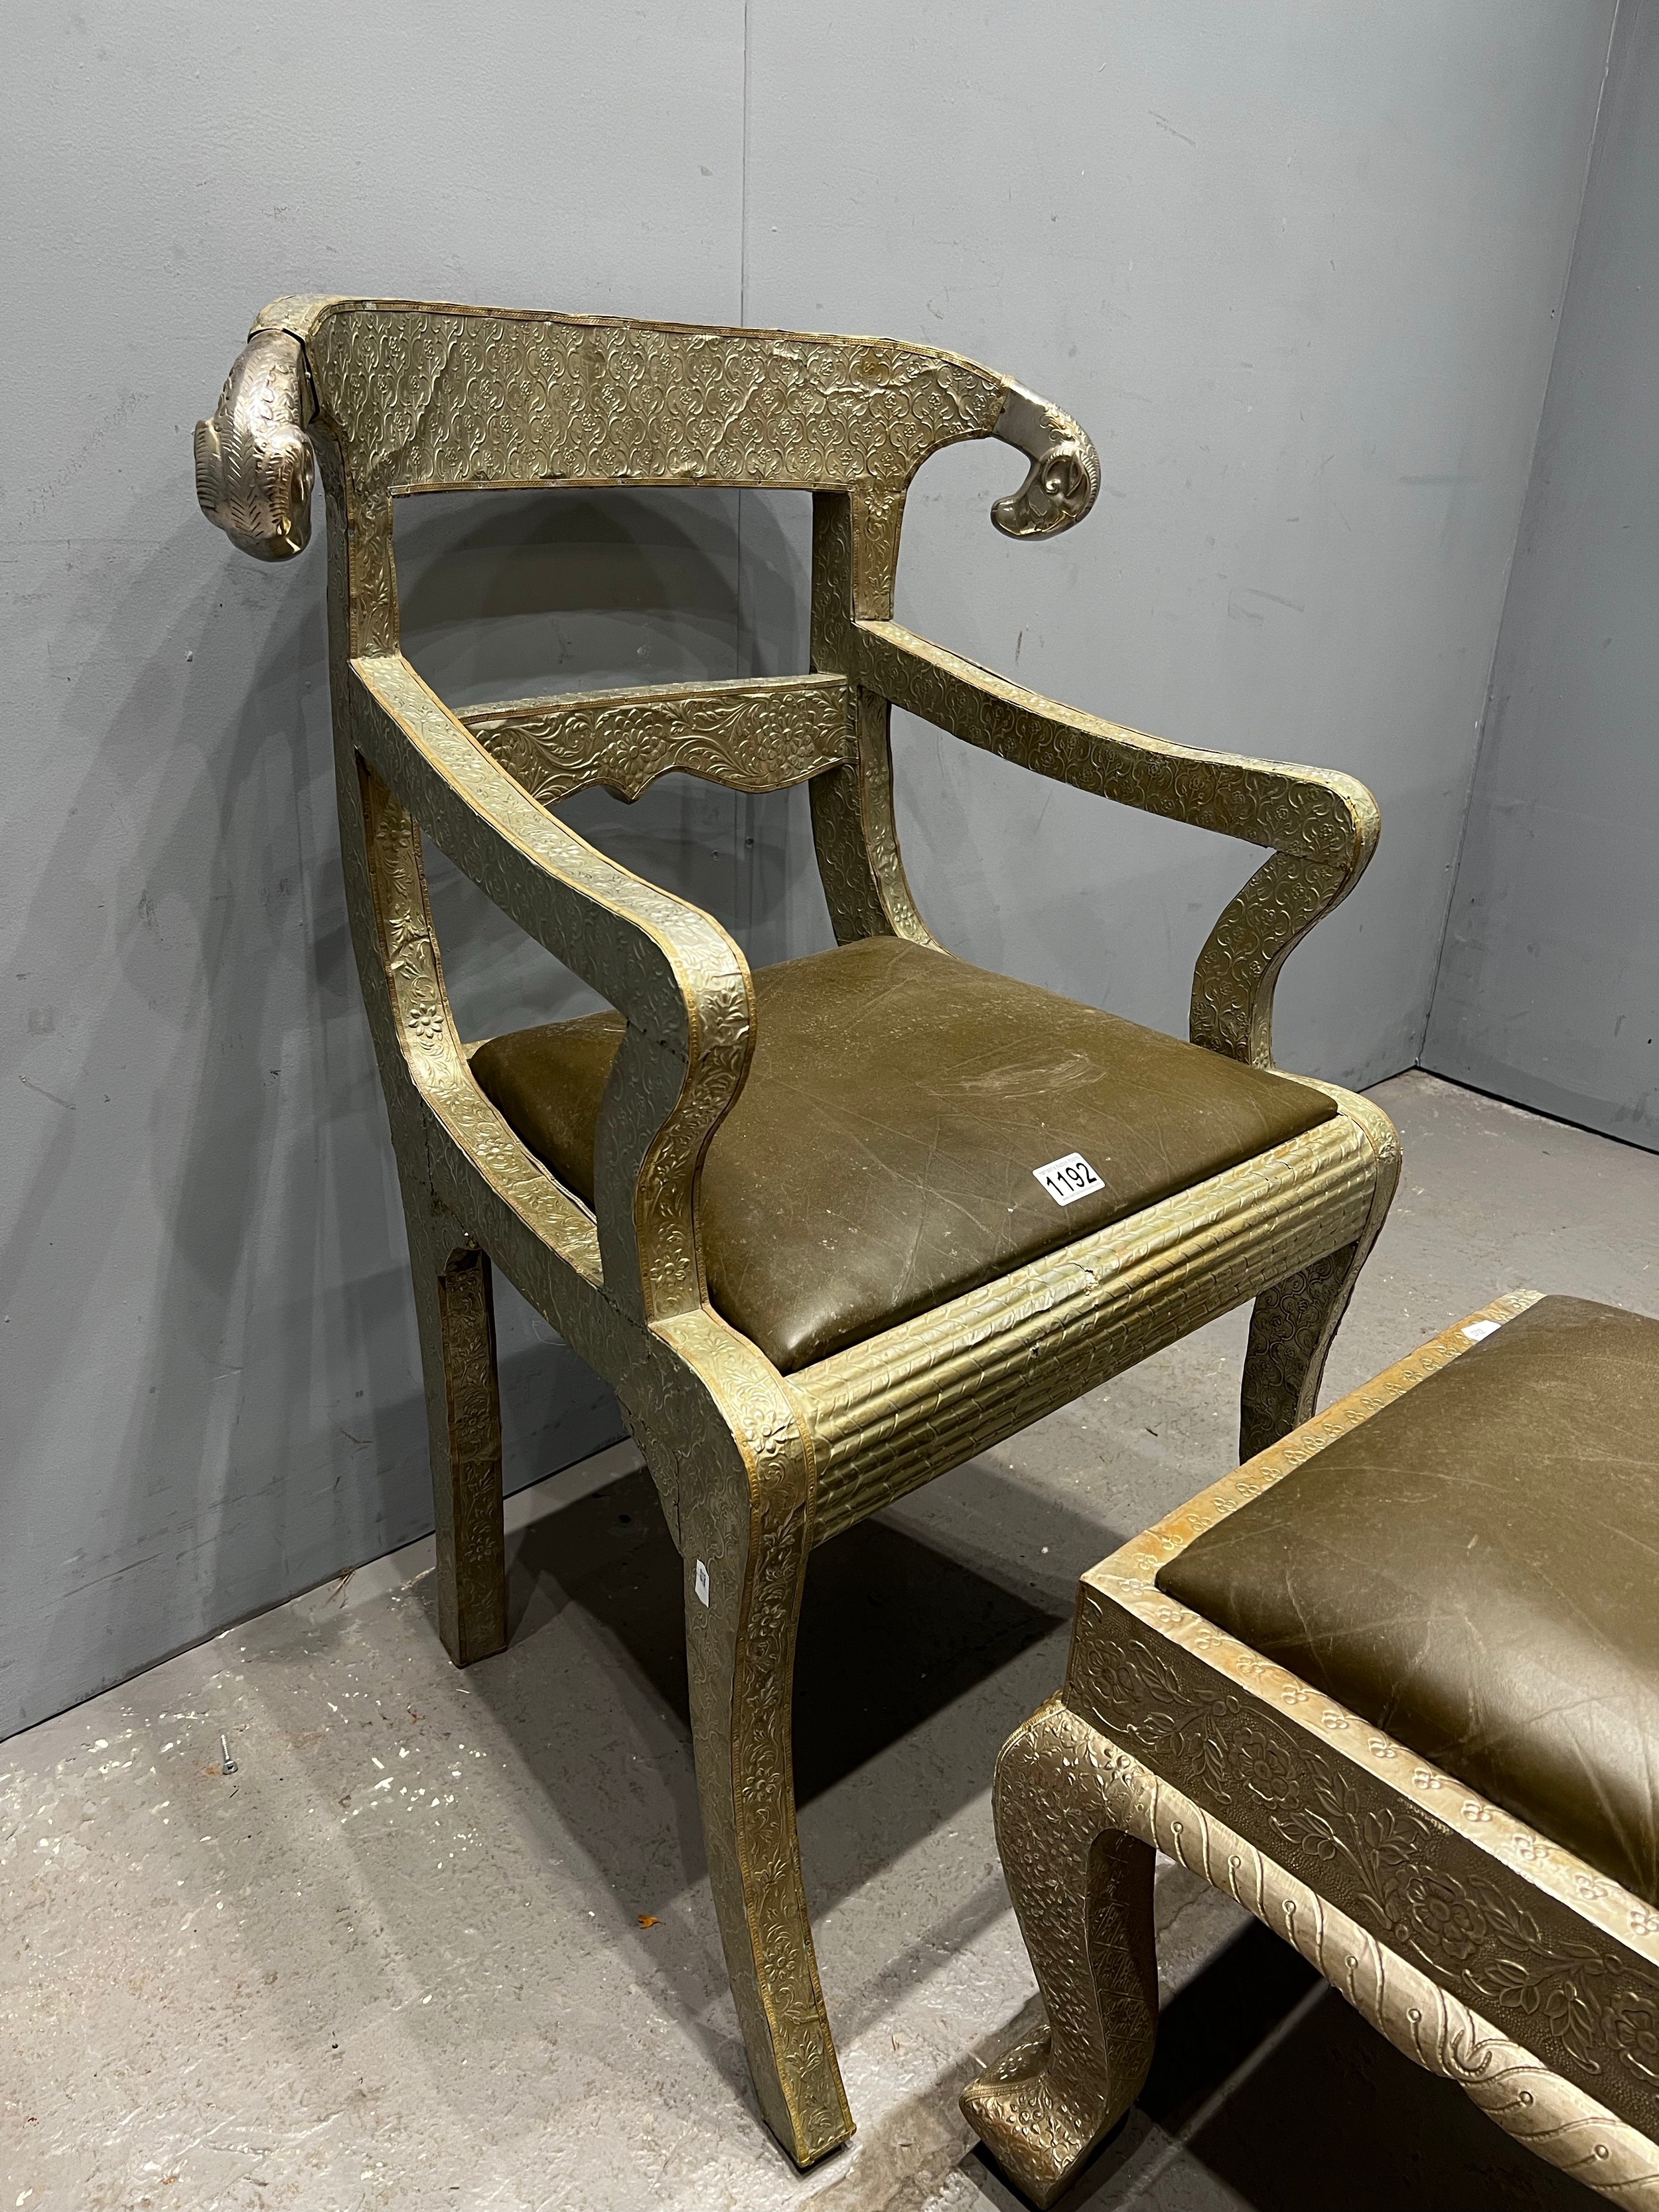 Dowry Chair And Footstool A Striking Vintage Anglo-Indian Silvered Metal-Clad Chair, 20th Century,